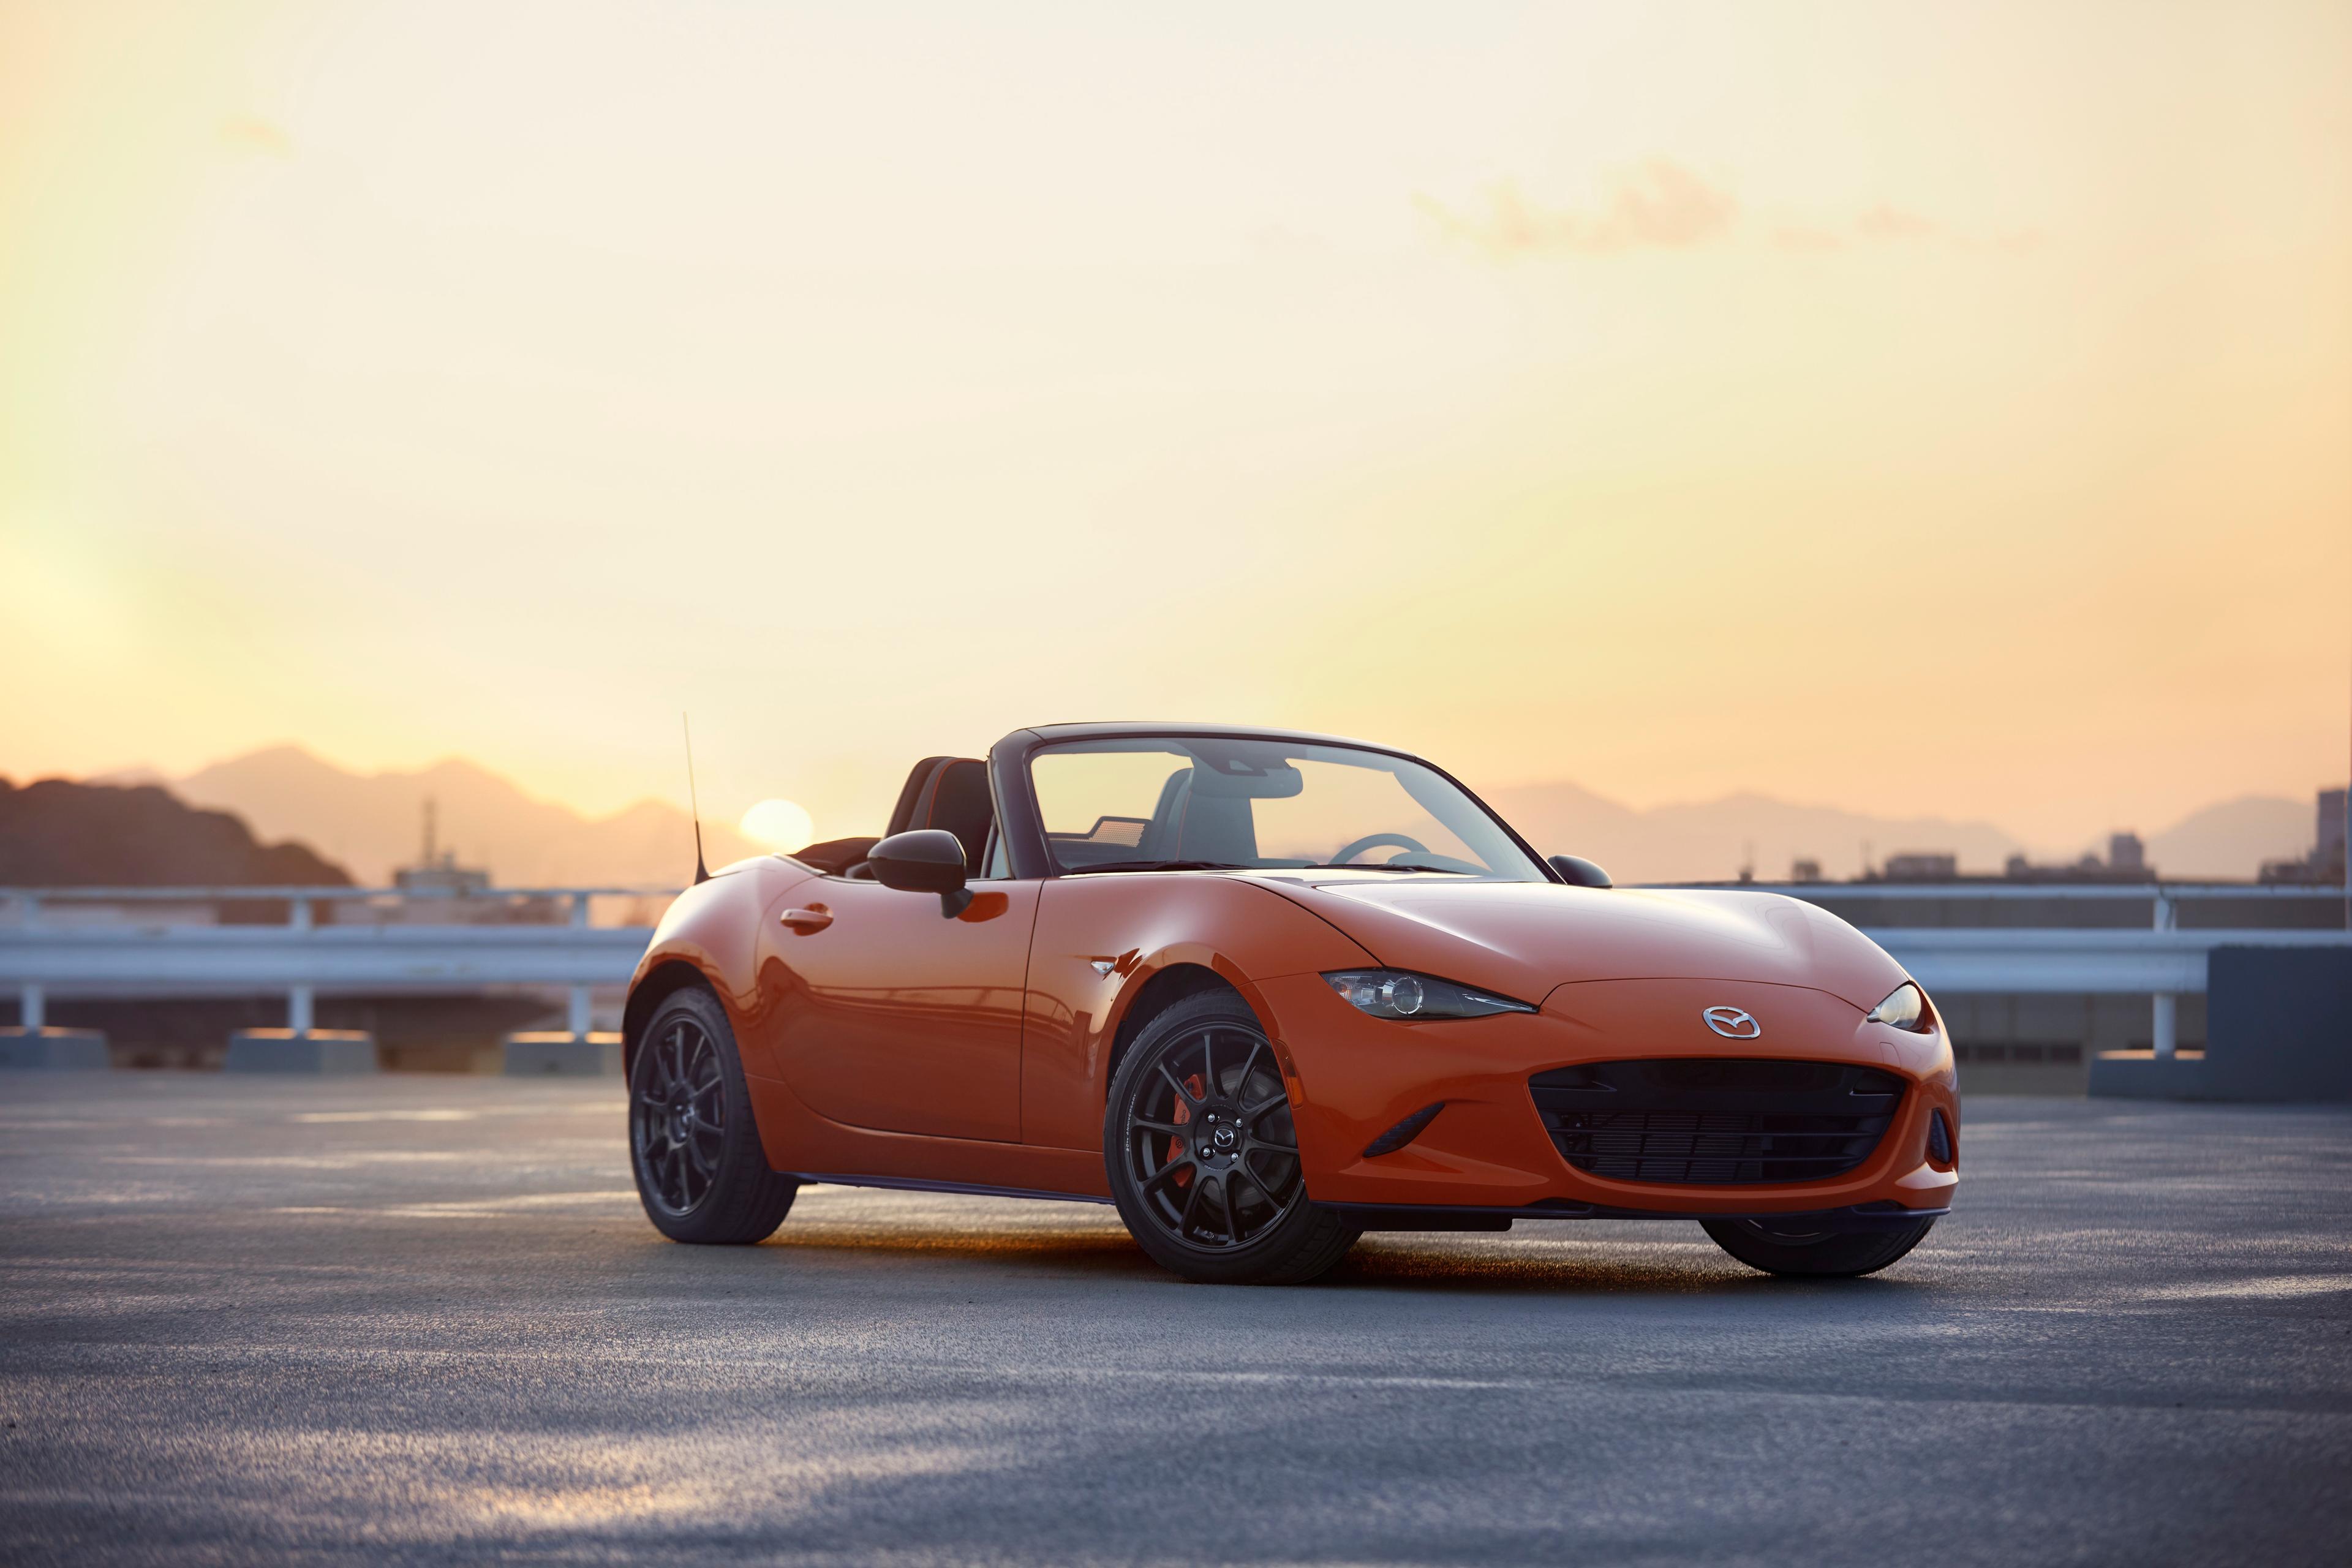 Mazda is constantly striving to improve the Miata.